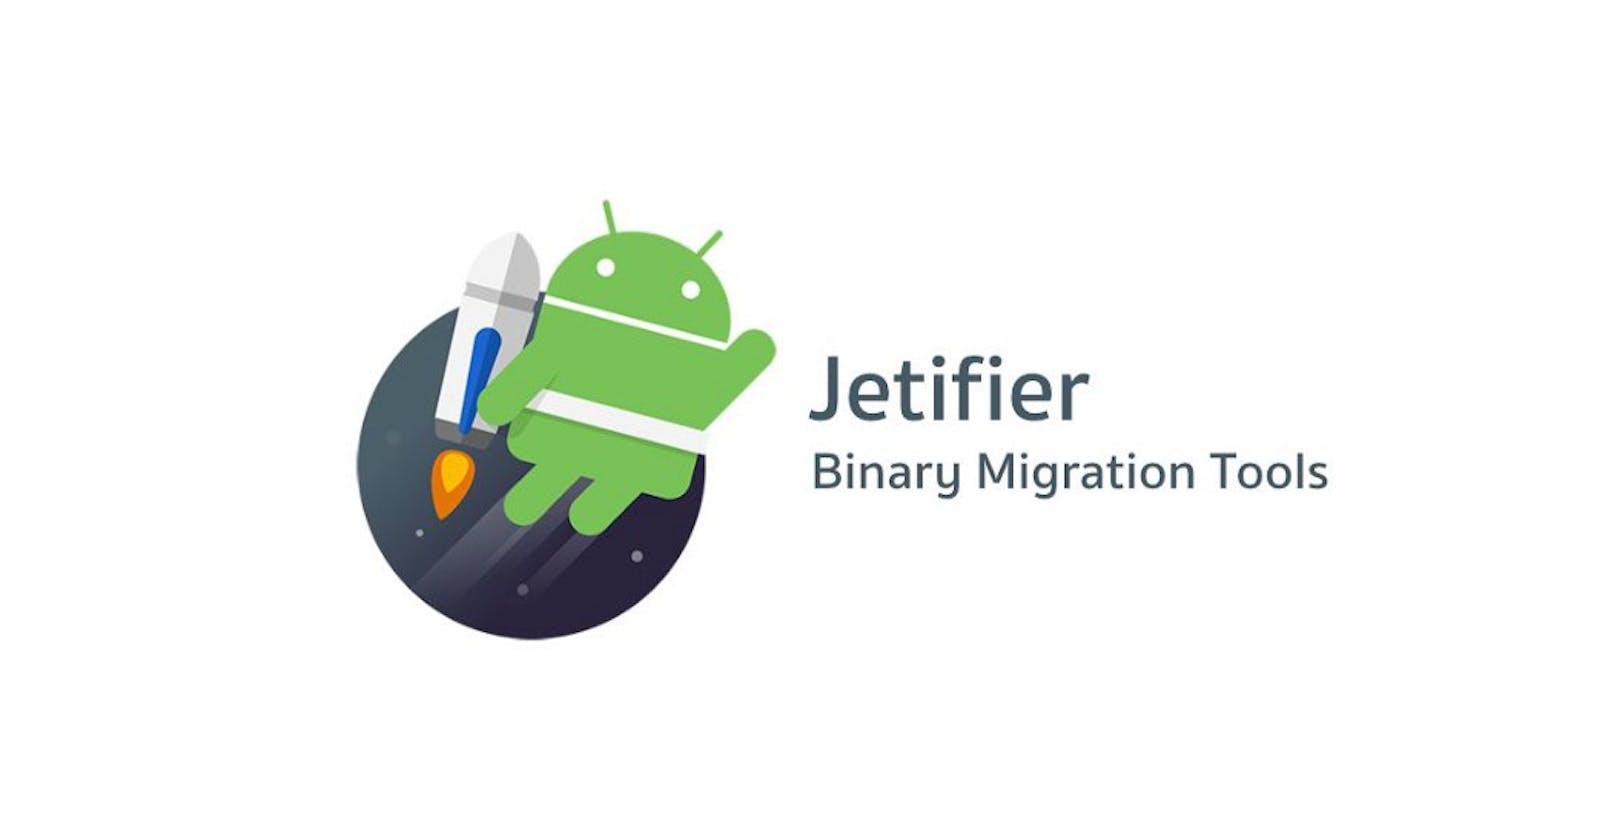 Android Jetifier — Can we say Bye-Bye yet